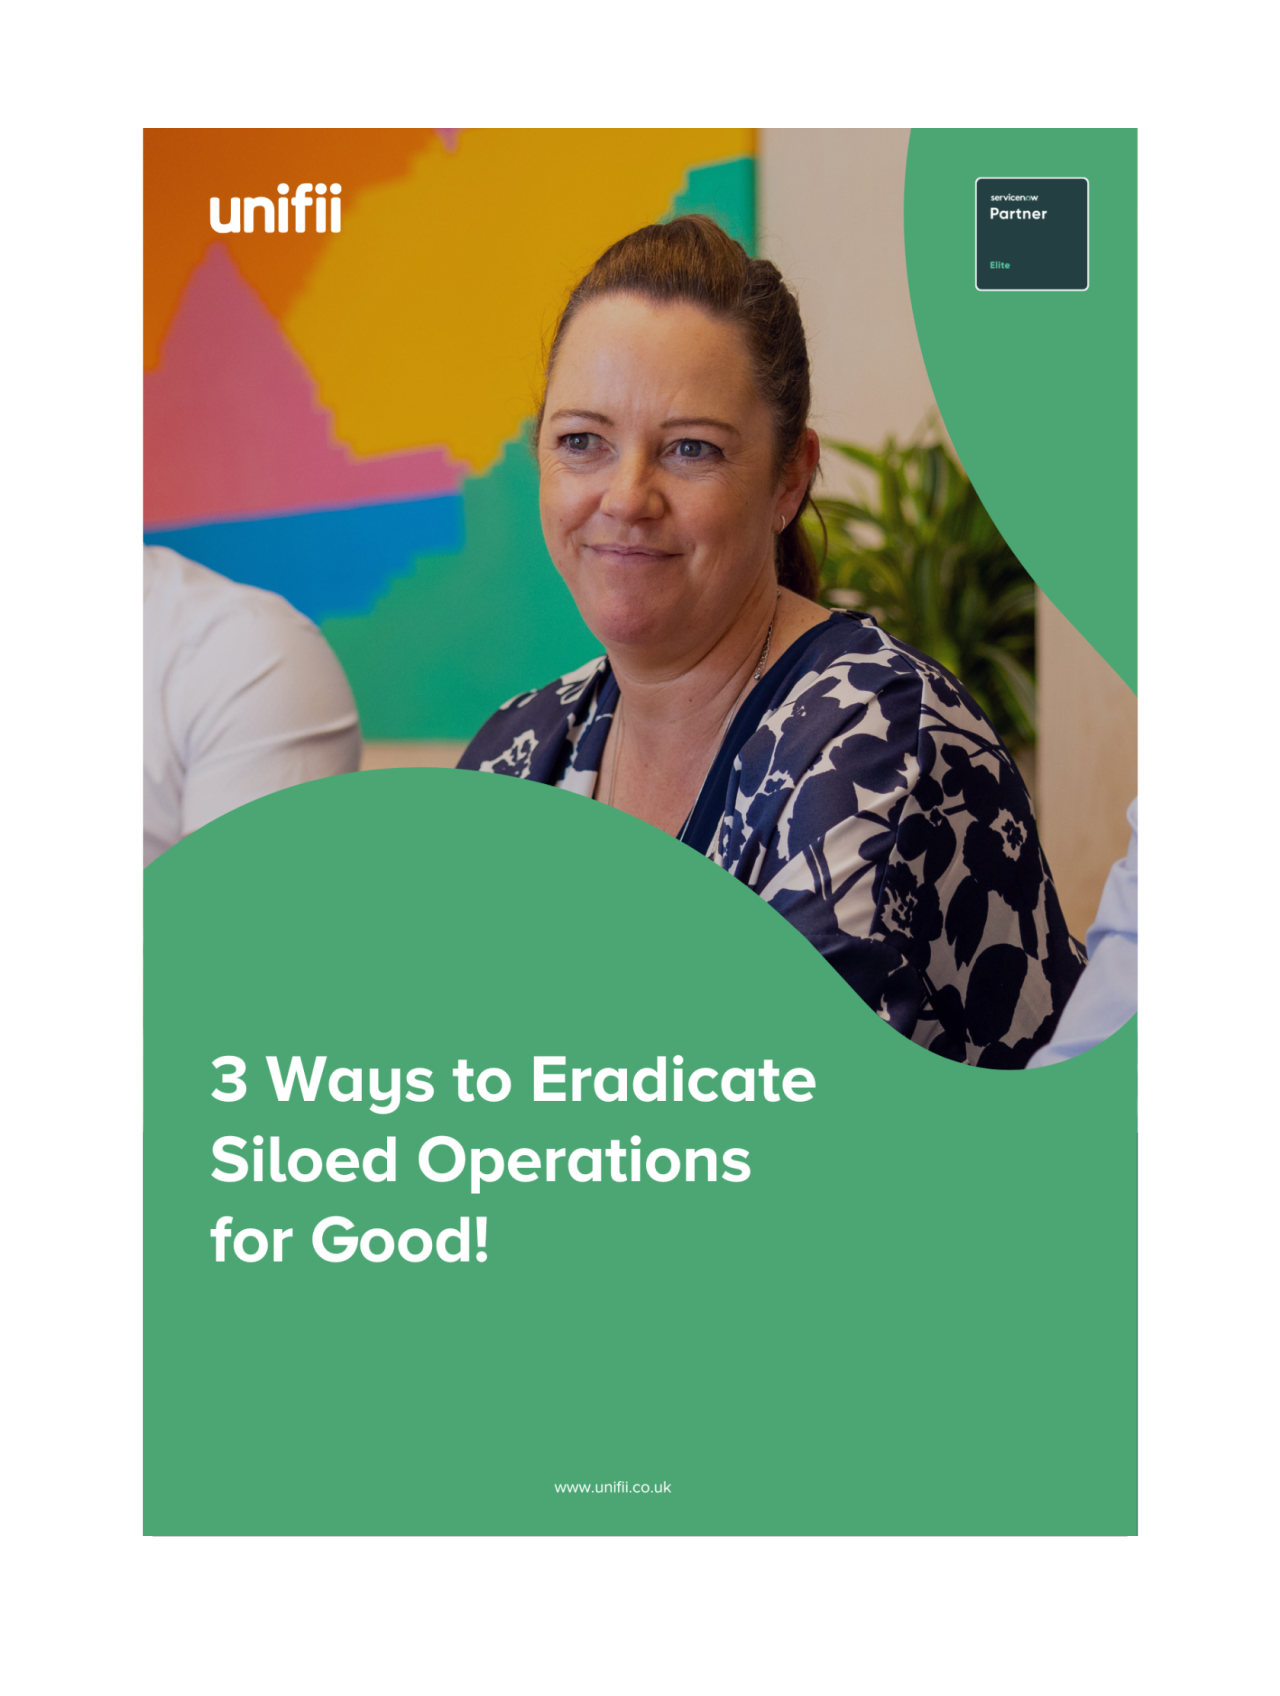 3 ways to eradicate siloed operations for good.